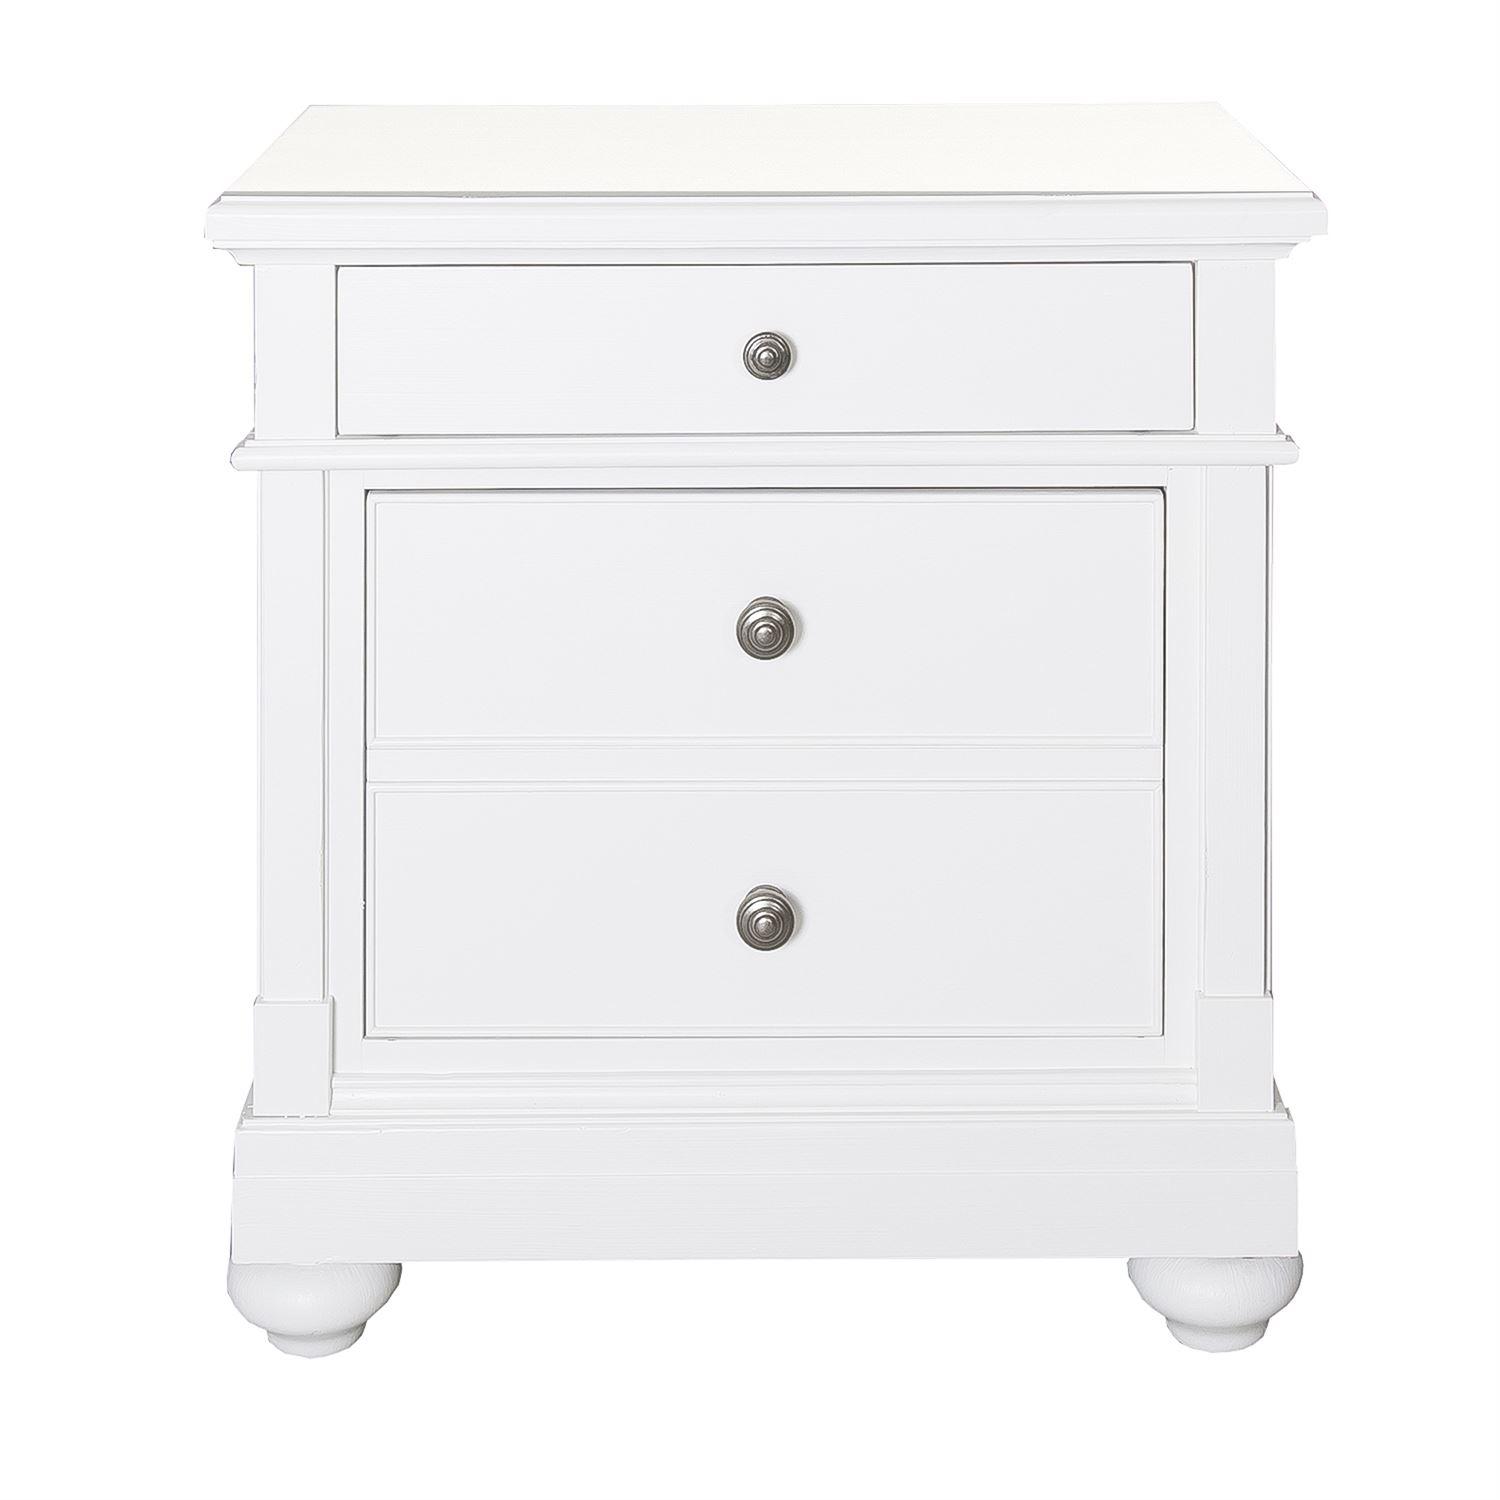 Cottage Nightstand Harbor View II  (631-BR) Nightstand 631-BR61 in White 